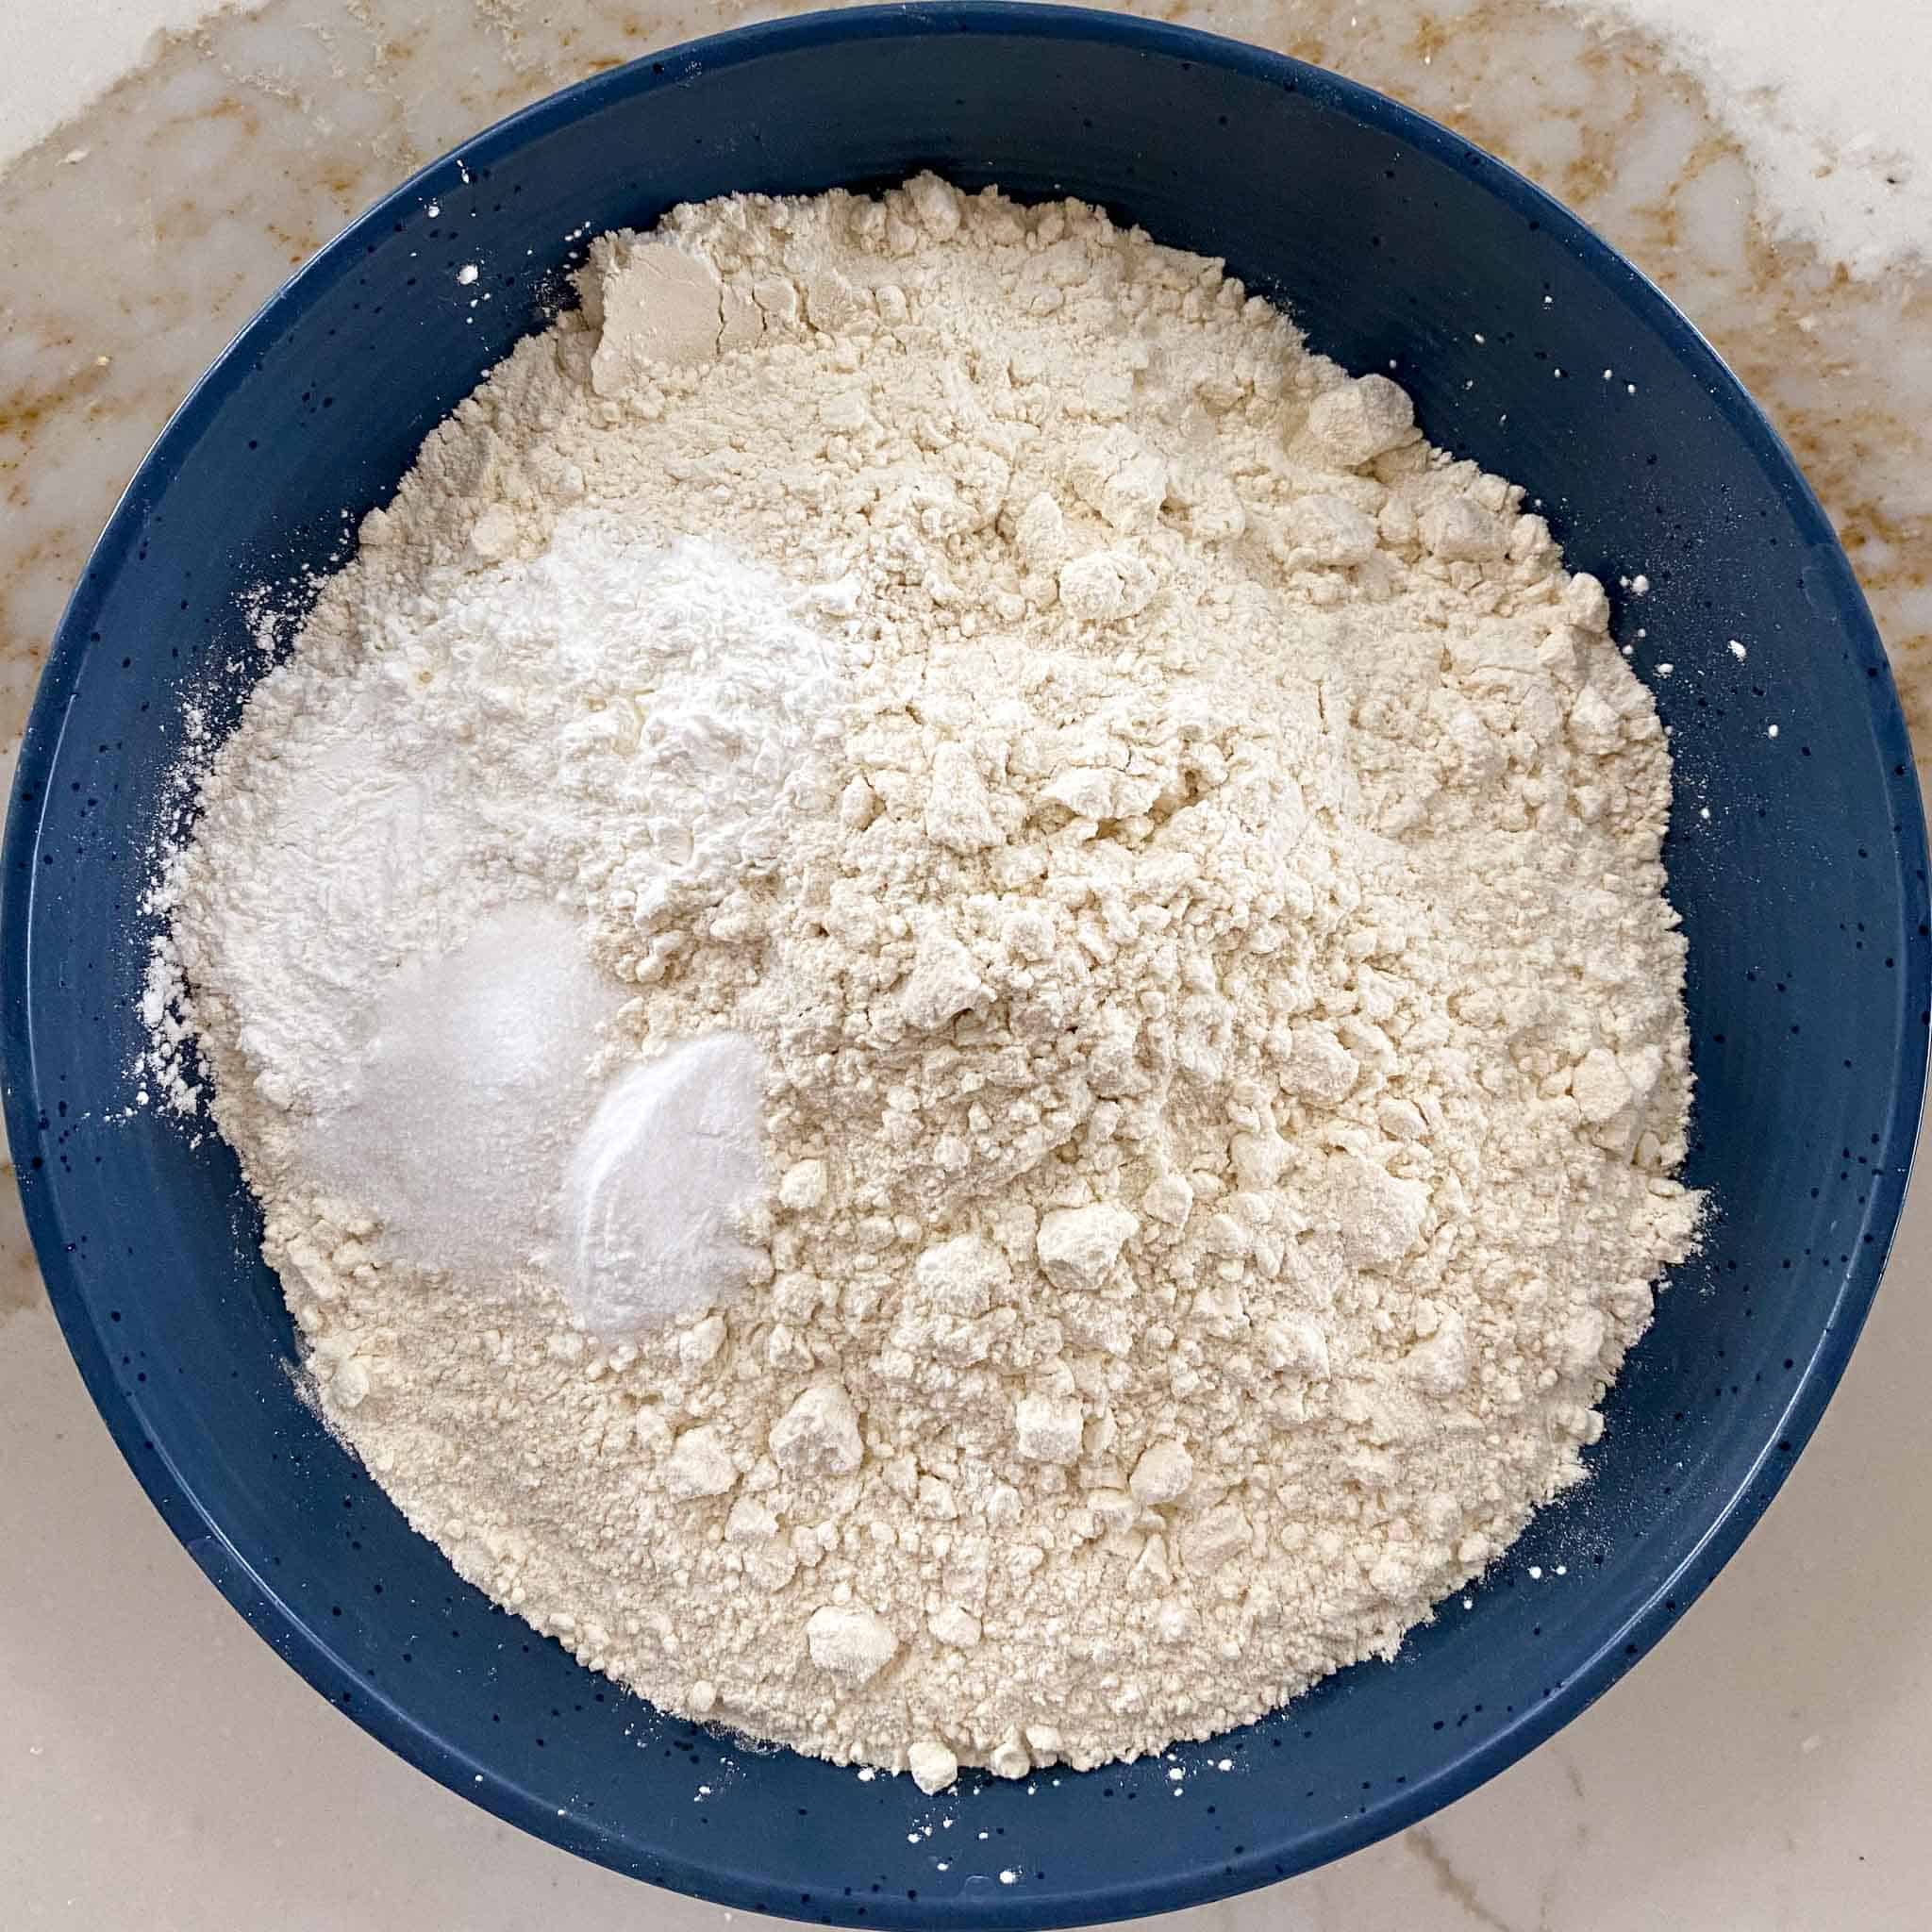 Flour mixture for no butter chocolate chip cookies.